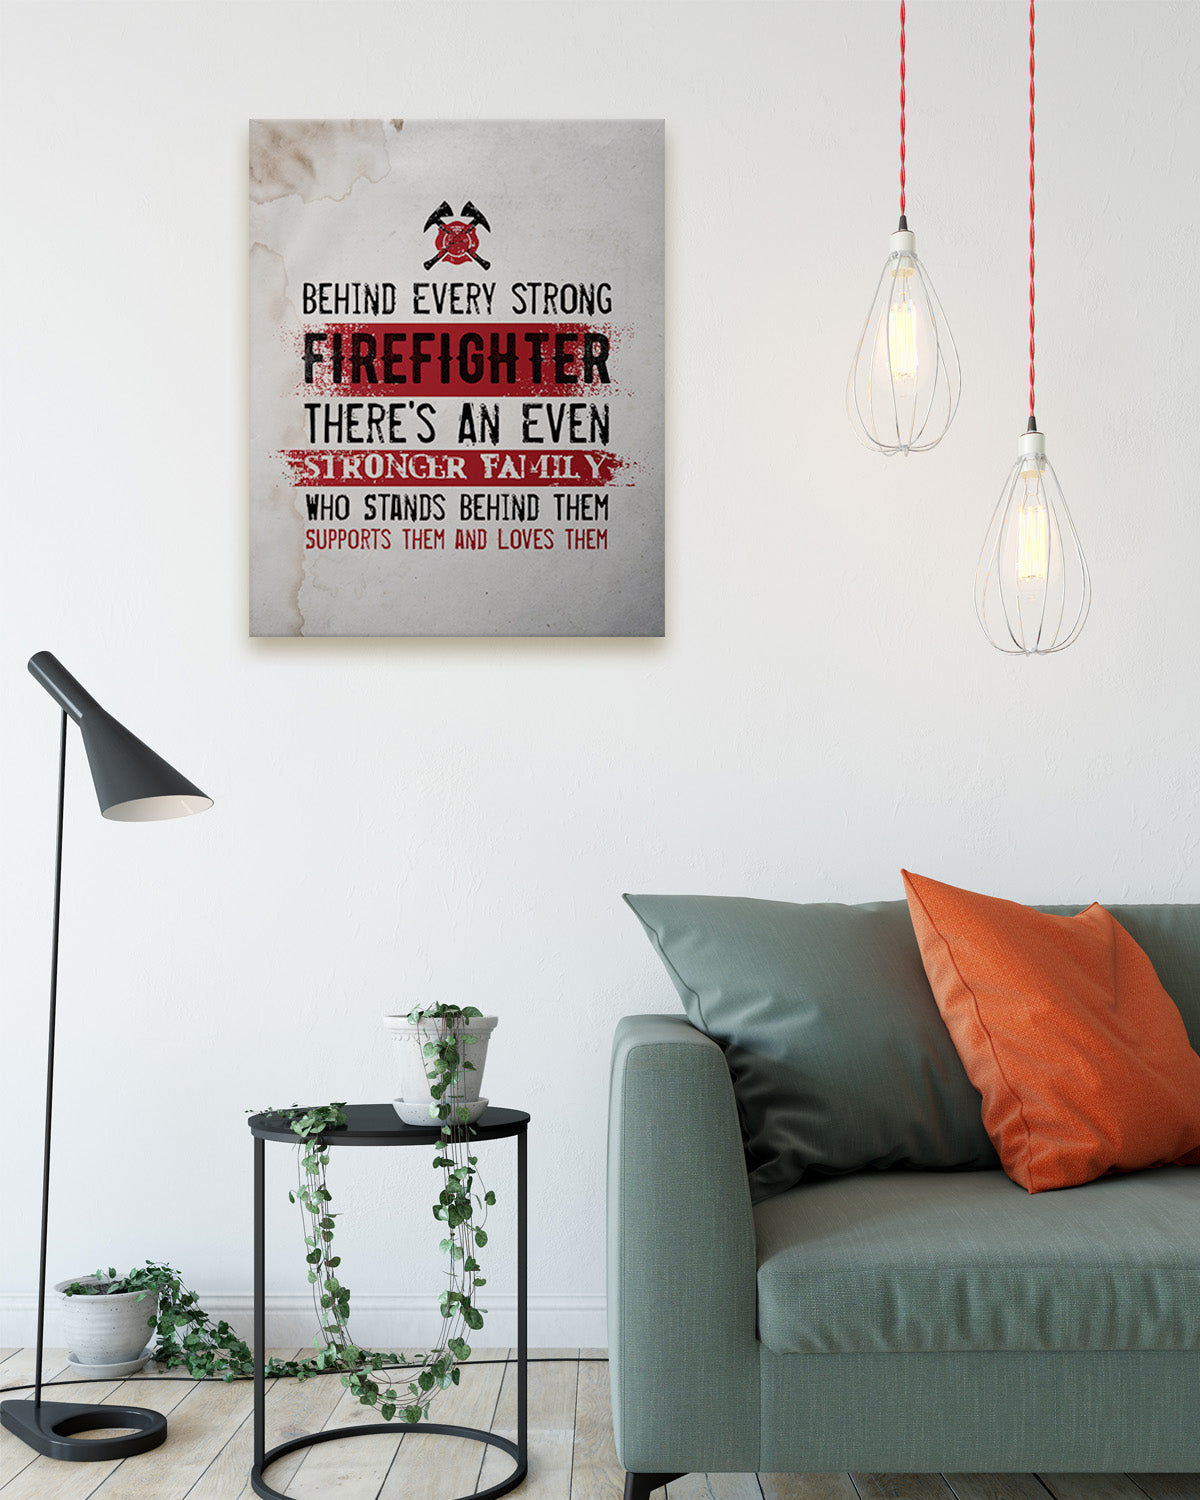 Firefighter Motivational Posters, Prints or Canvas - Firefighter Gifts - First Responder Gifts - First Responder Decor Appreciation Decor - Gifts for Firemen or Women